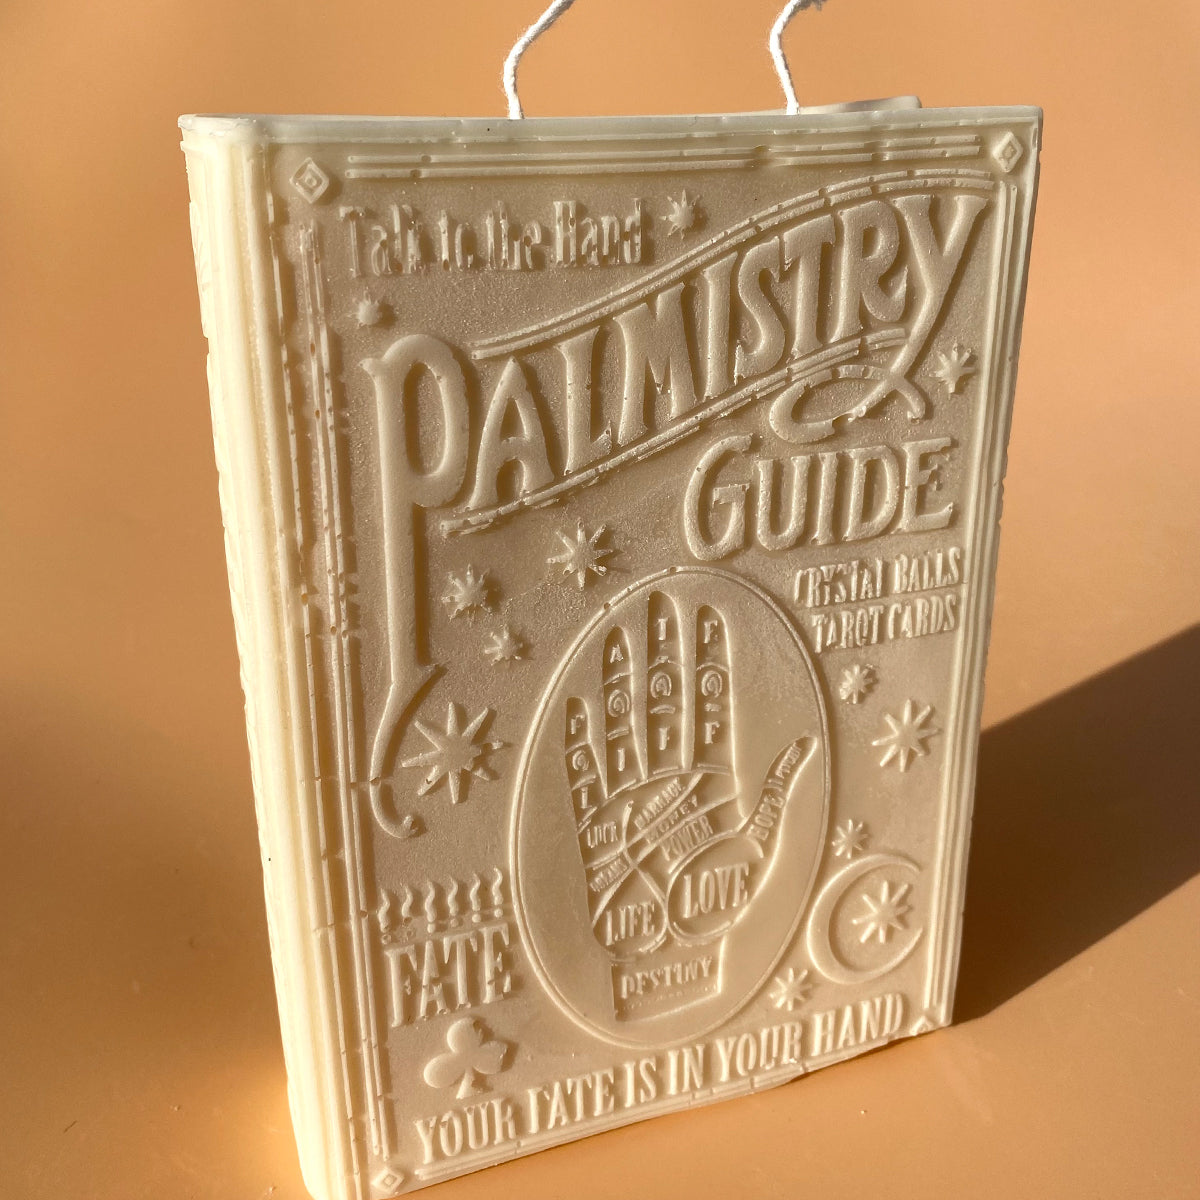 Palmistry Candle Book - White